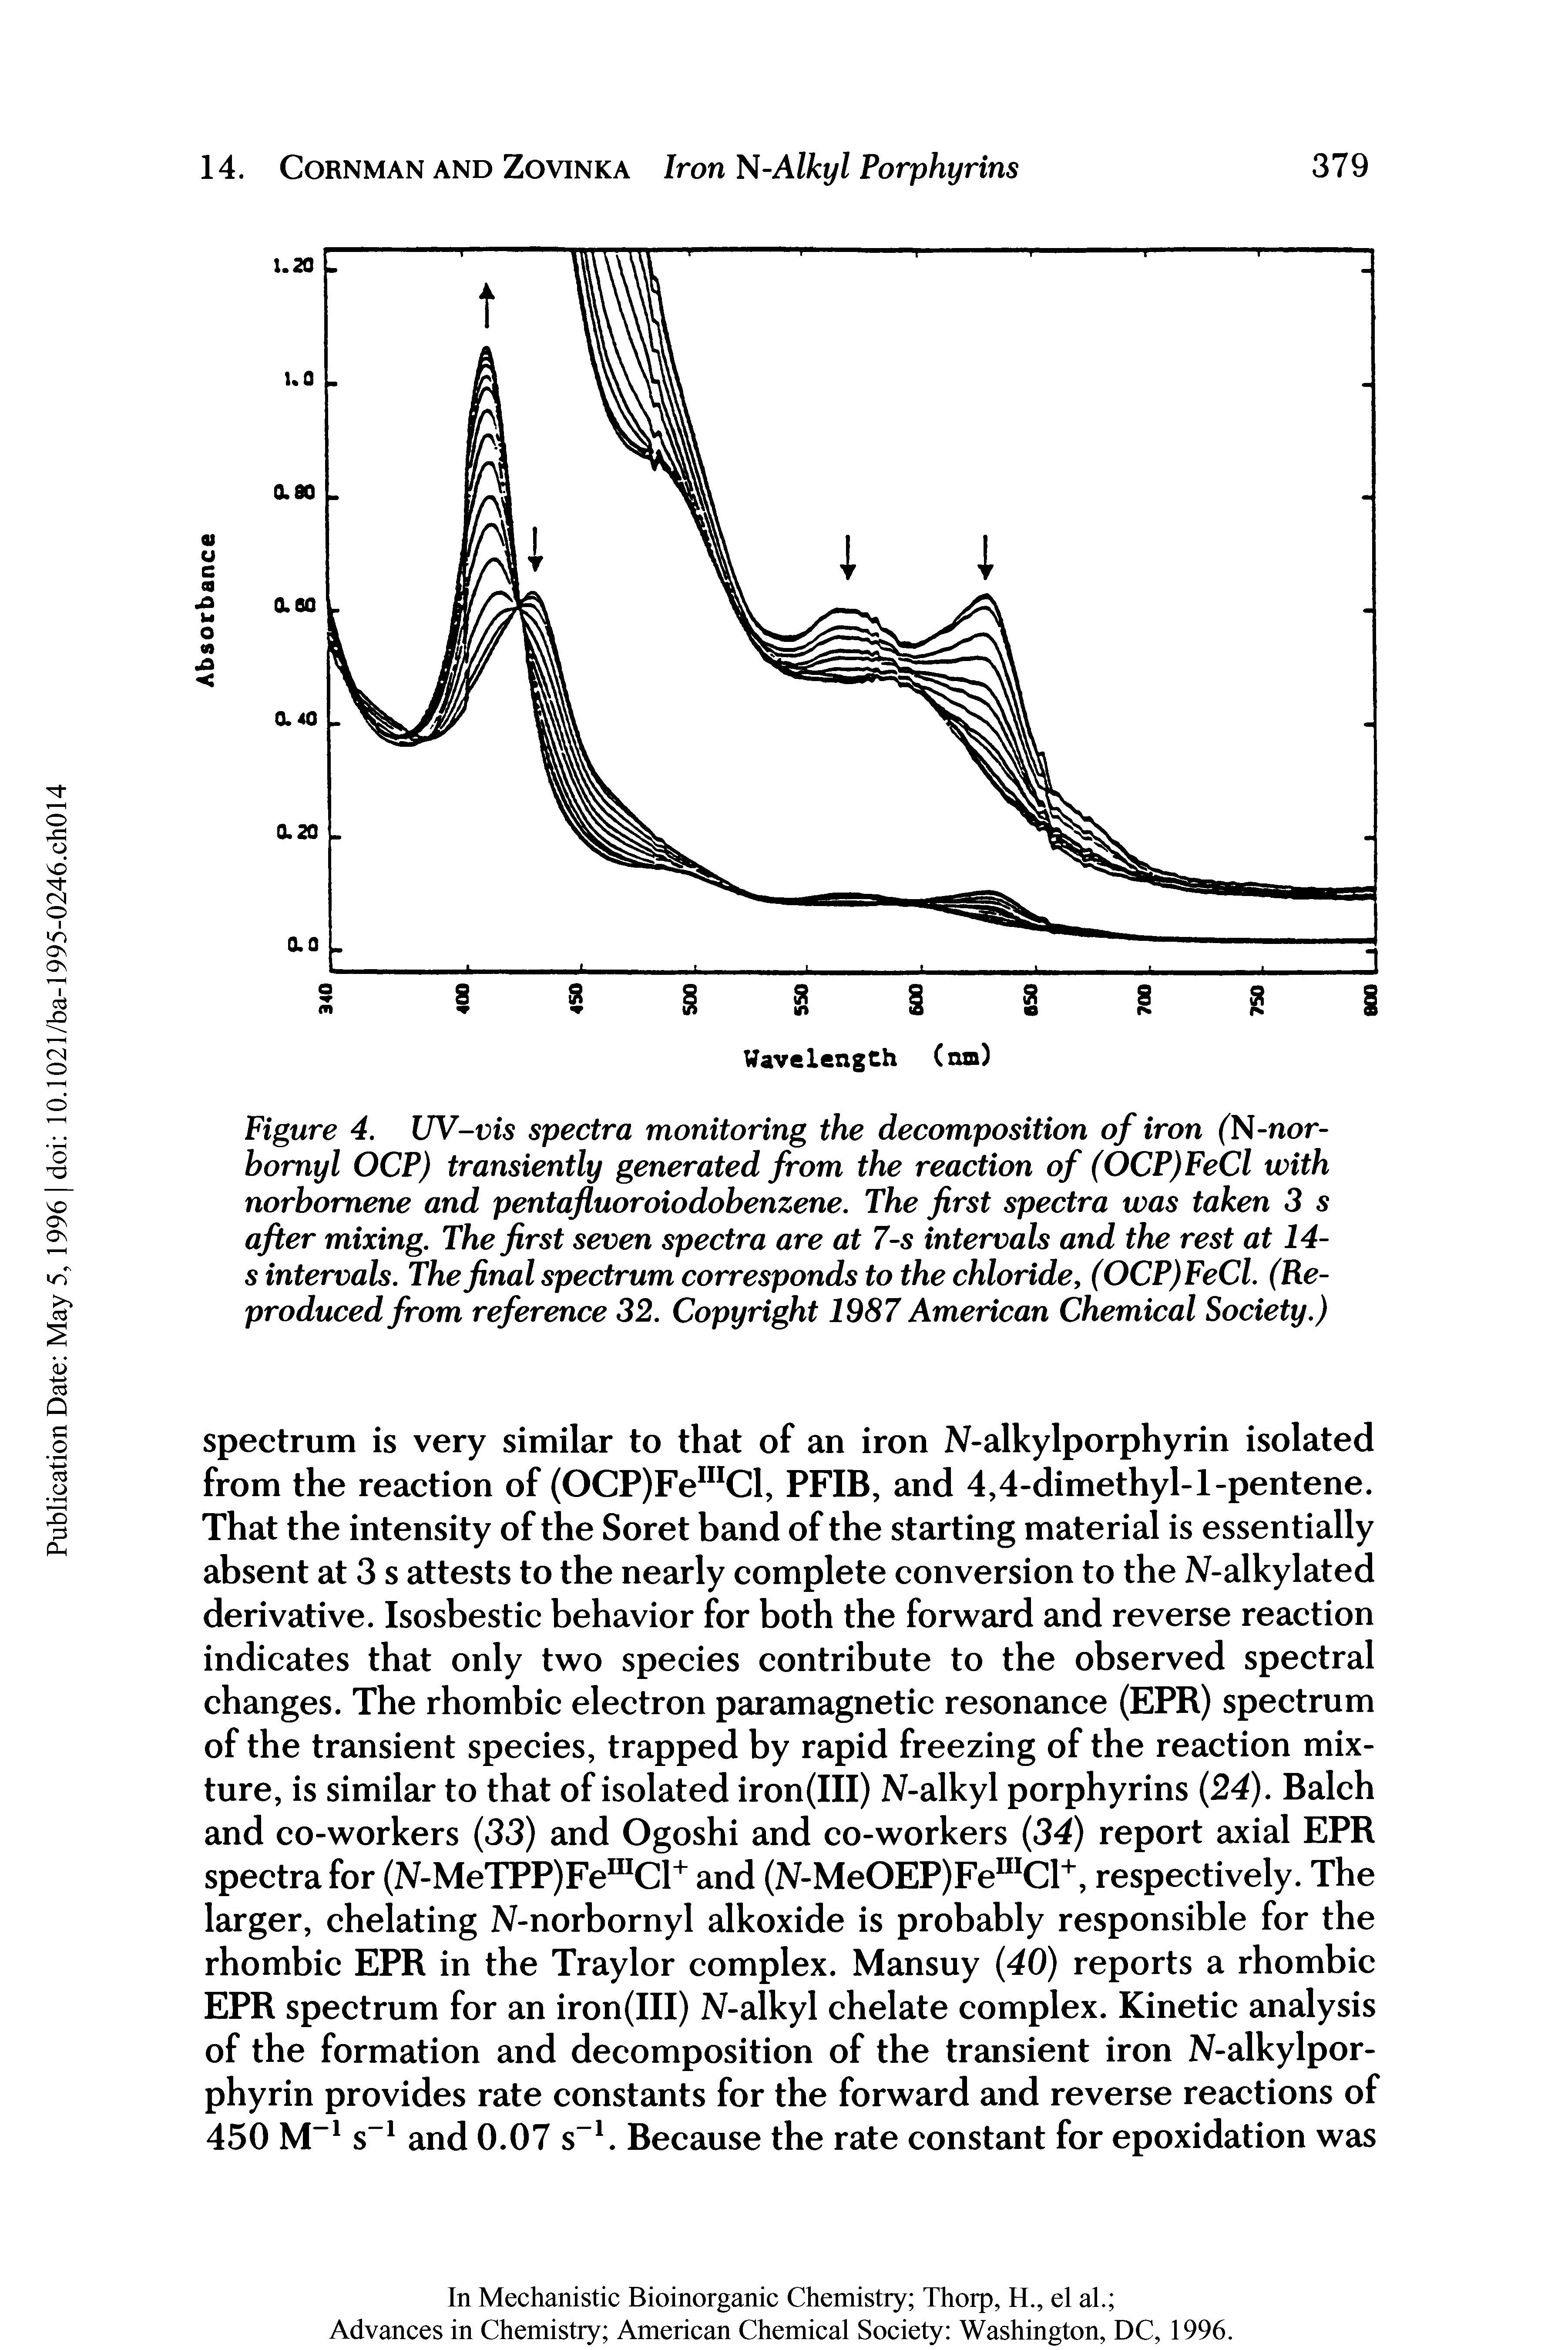 Figure 4. UV-vis spectra monitoring the decomposition of iron (N-nor-bomyl OCP) transiently generated from the reaction of (OCP)FeCl with norbomene and pentafluoroiodobenzene. The first spectra was taken 3 s after mixing. The first seven spectra are at 7-s intervals and the rest at 14-s intervals. The final spectrum corresponds to the chloride, (OCP)FeCl. (Reproduced from reference 32. Copyright 1987 American Chemical Society.)...